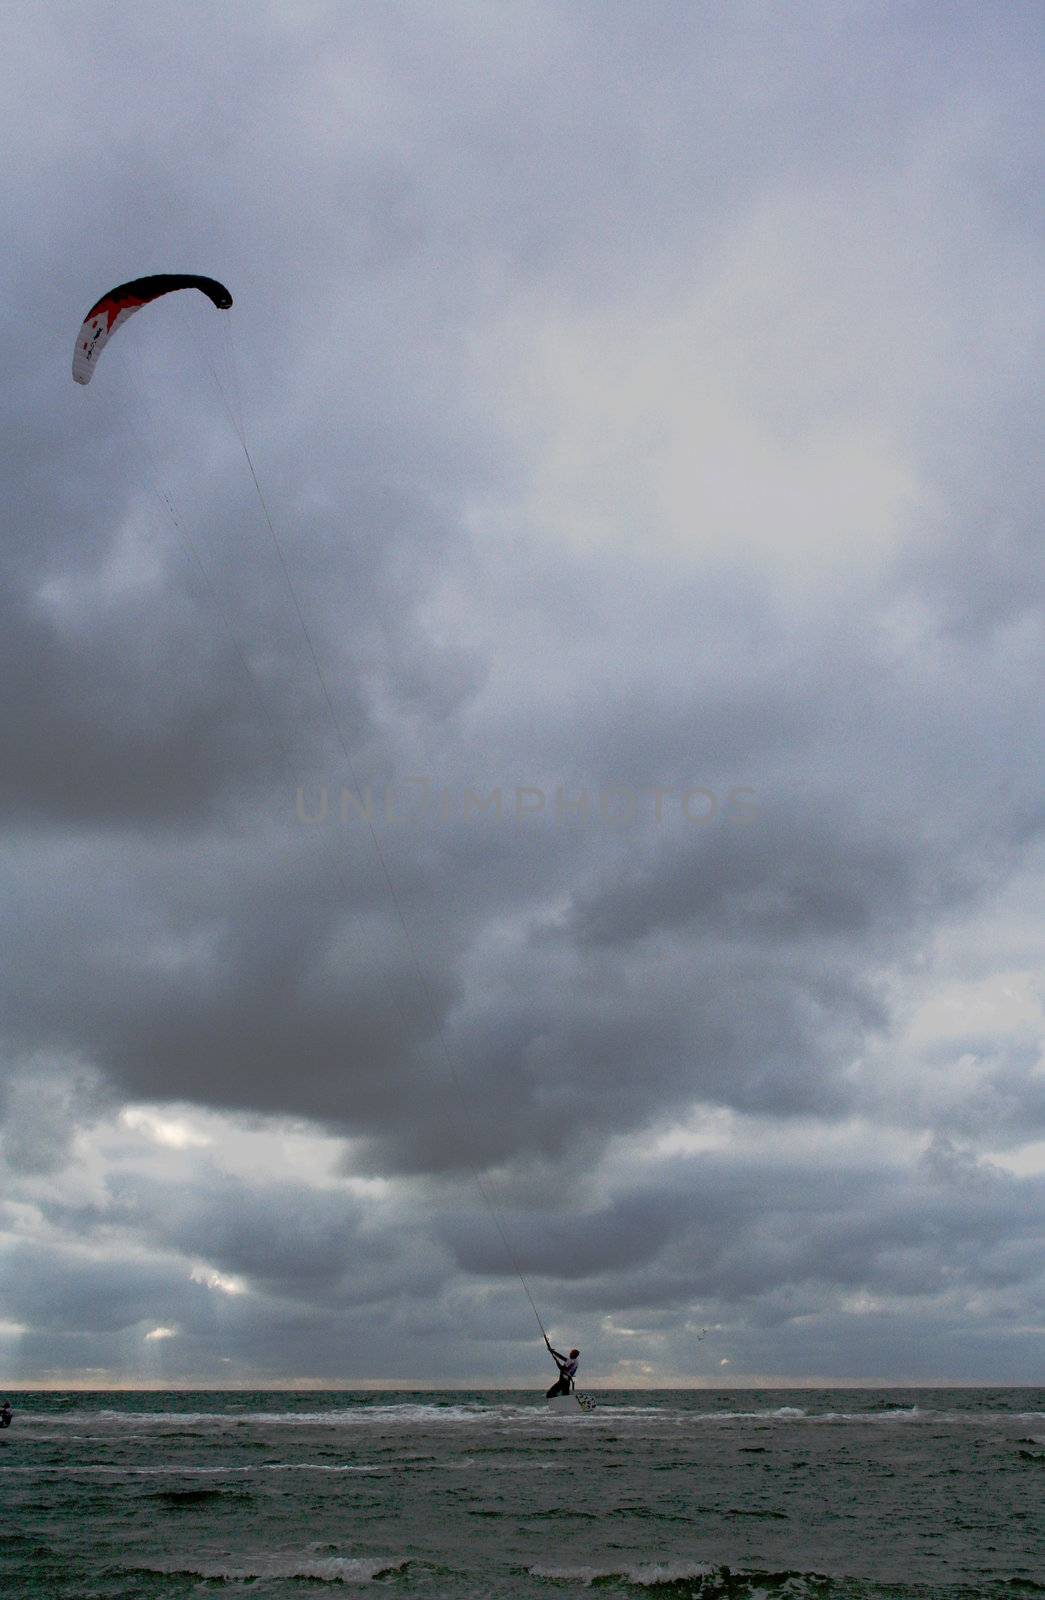 kite surfer on a cloudy day by bernjuer